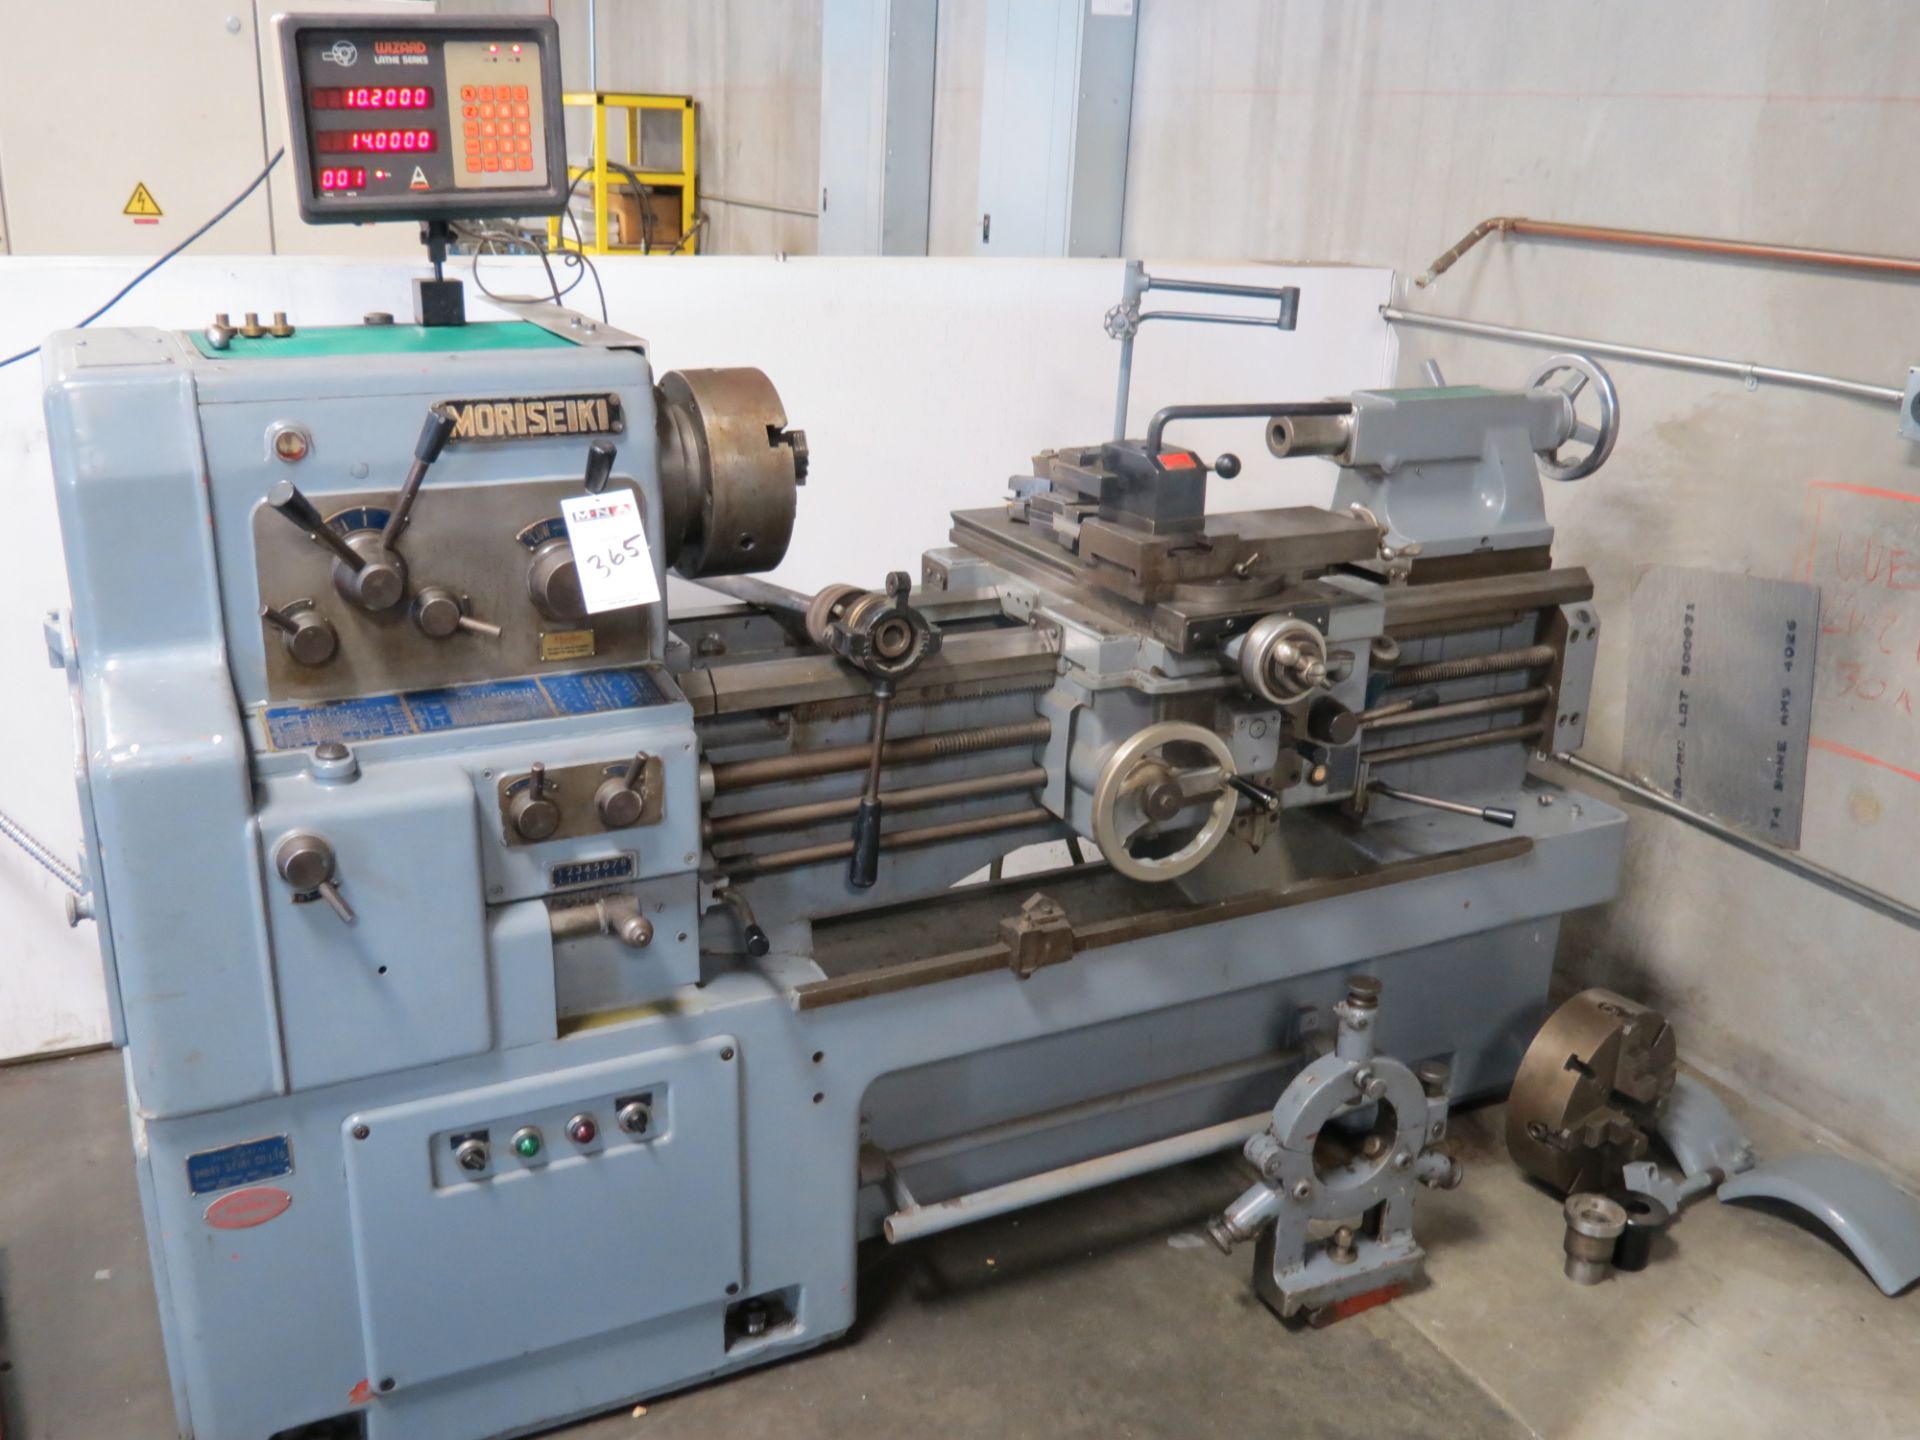 17" x 36" Mori Seiki MS-850G Gap Bed Engine Lathe, DRO, 3- and 4-jaw chucks, steady rest and tool - Image 5 of 5